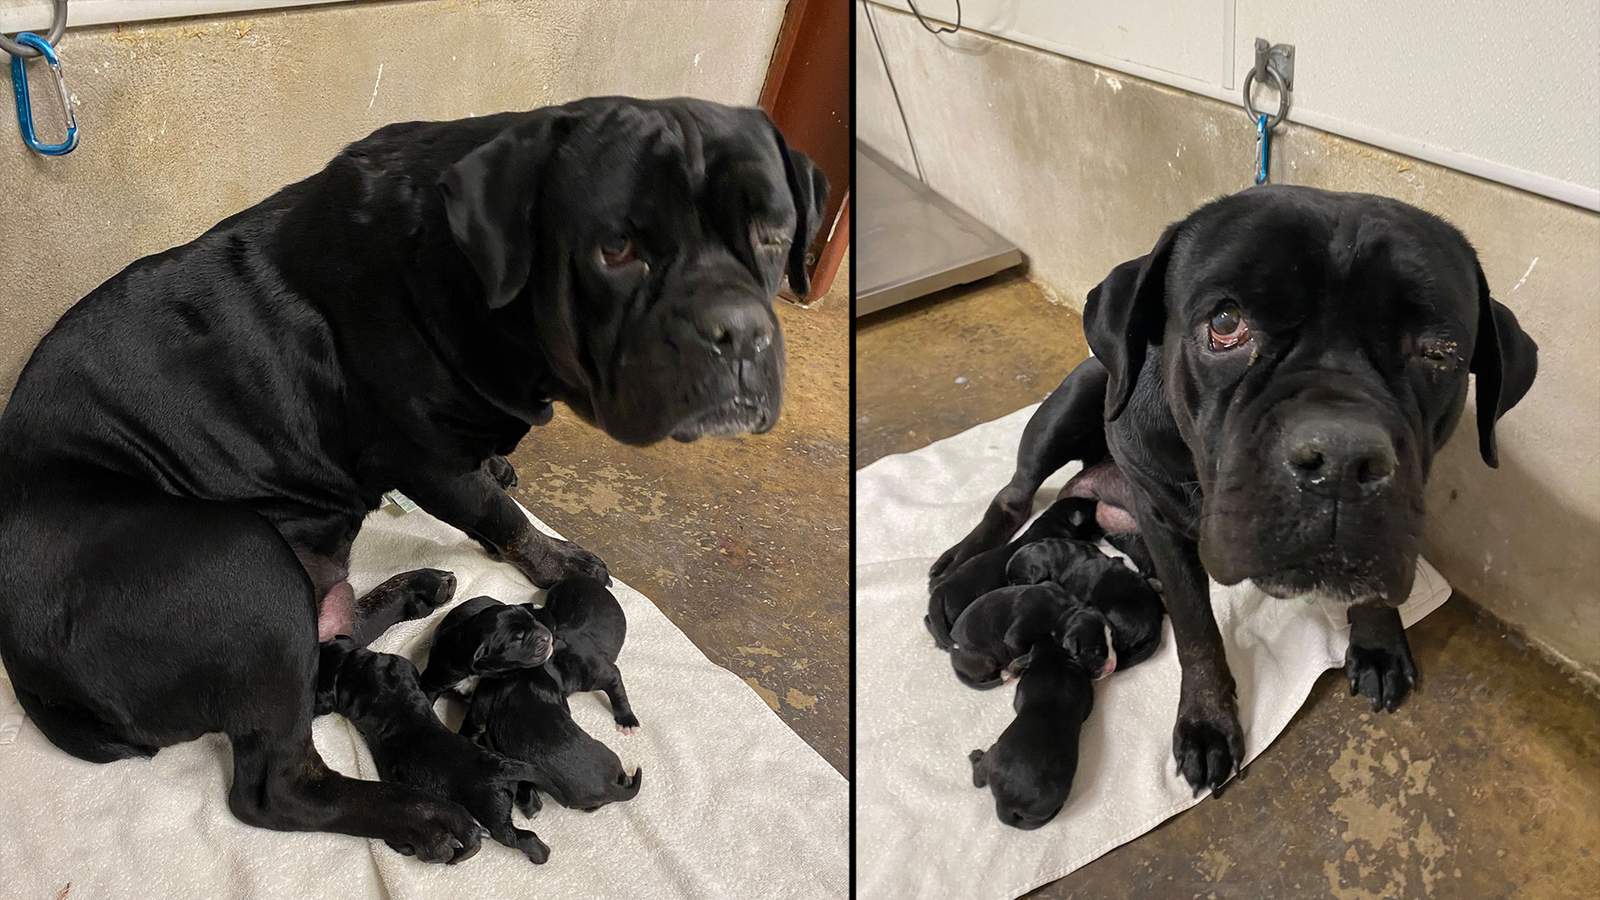 Newborn puppies and their mother found dumped on ‘lonely dirt road’ in Atascosa County